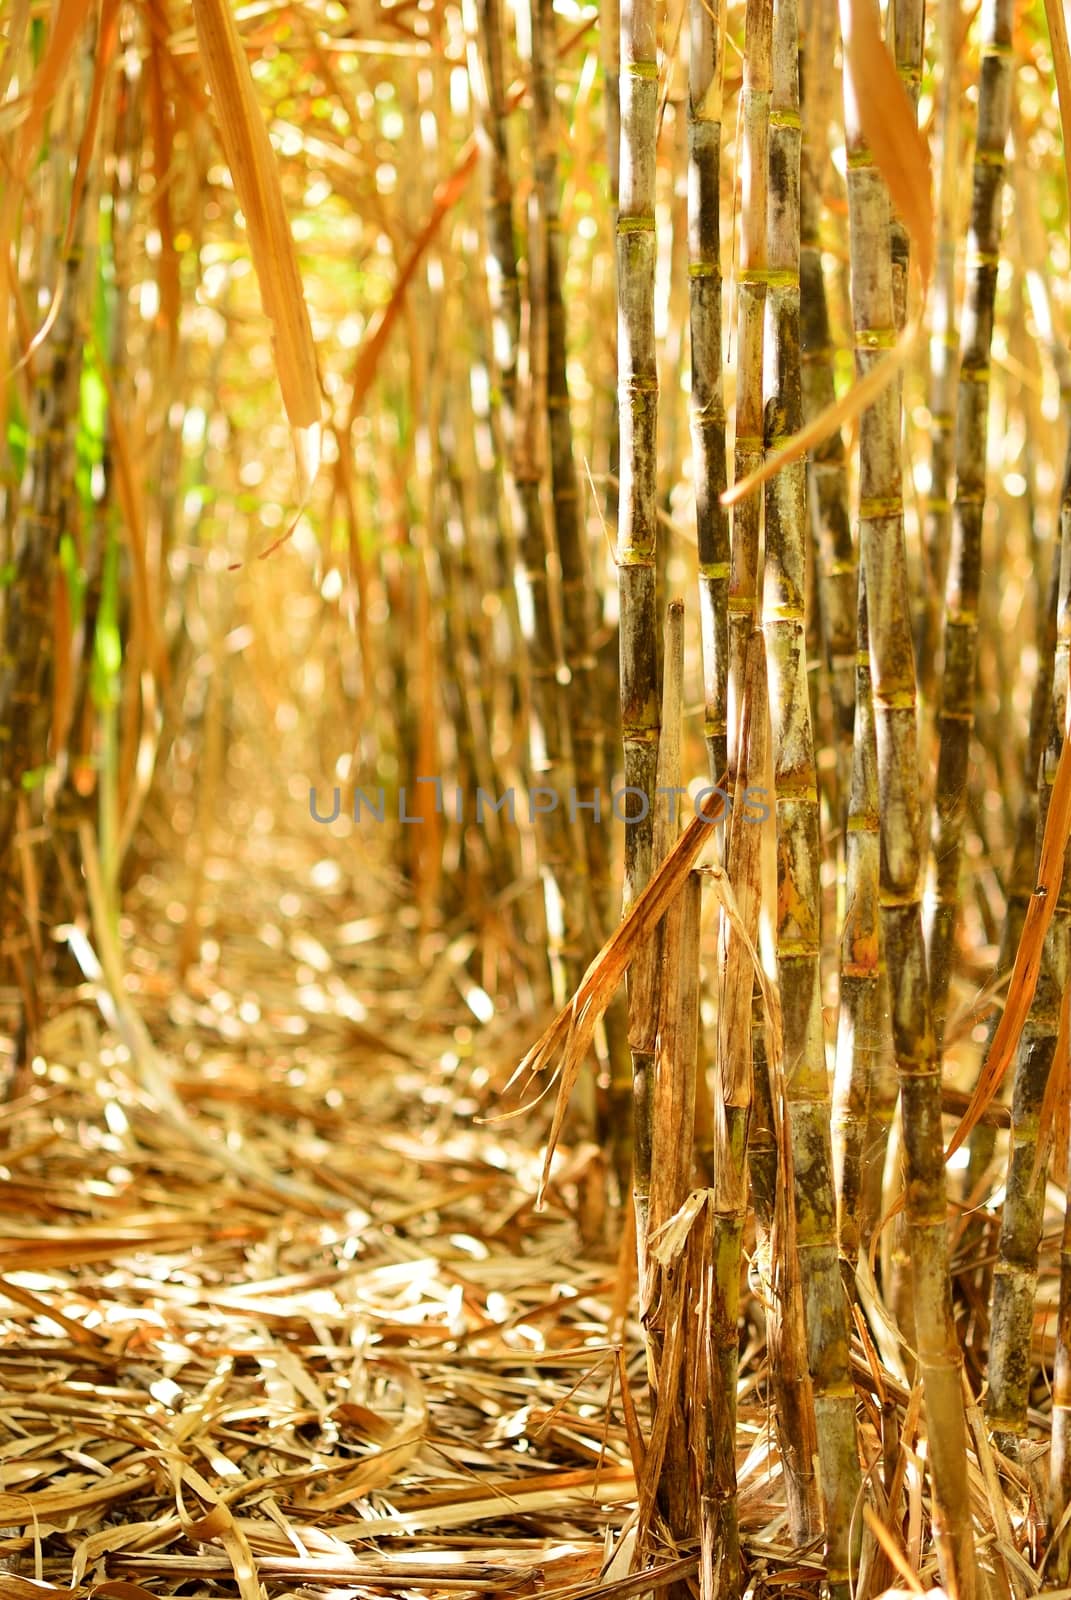 Cane row inside the sugarcane field in Thailand